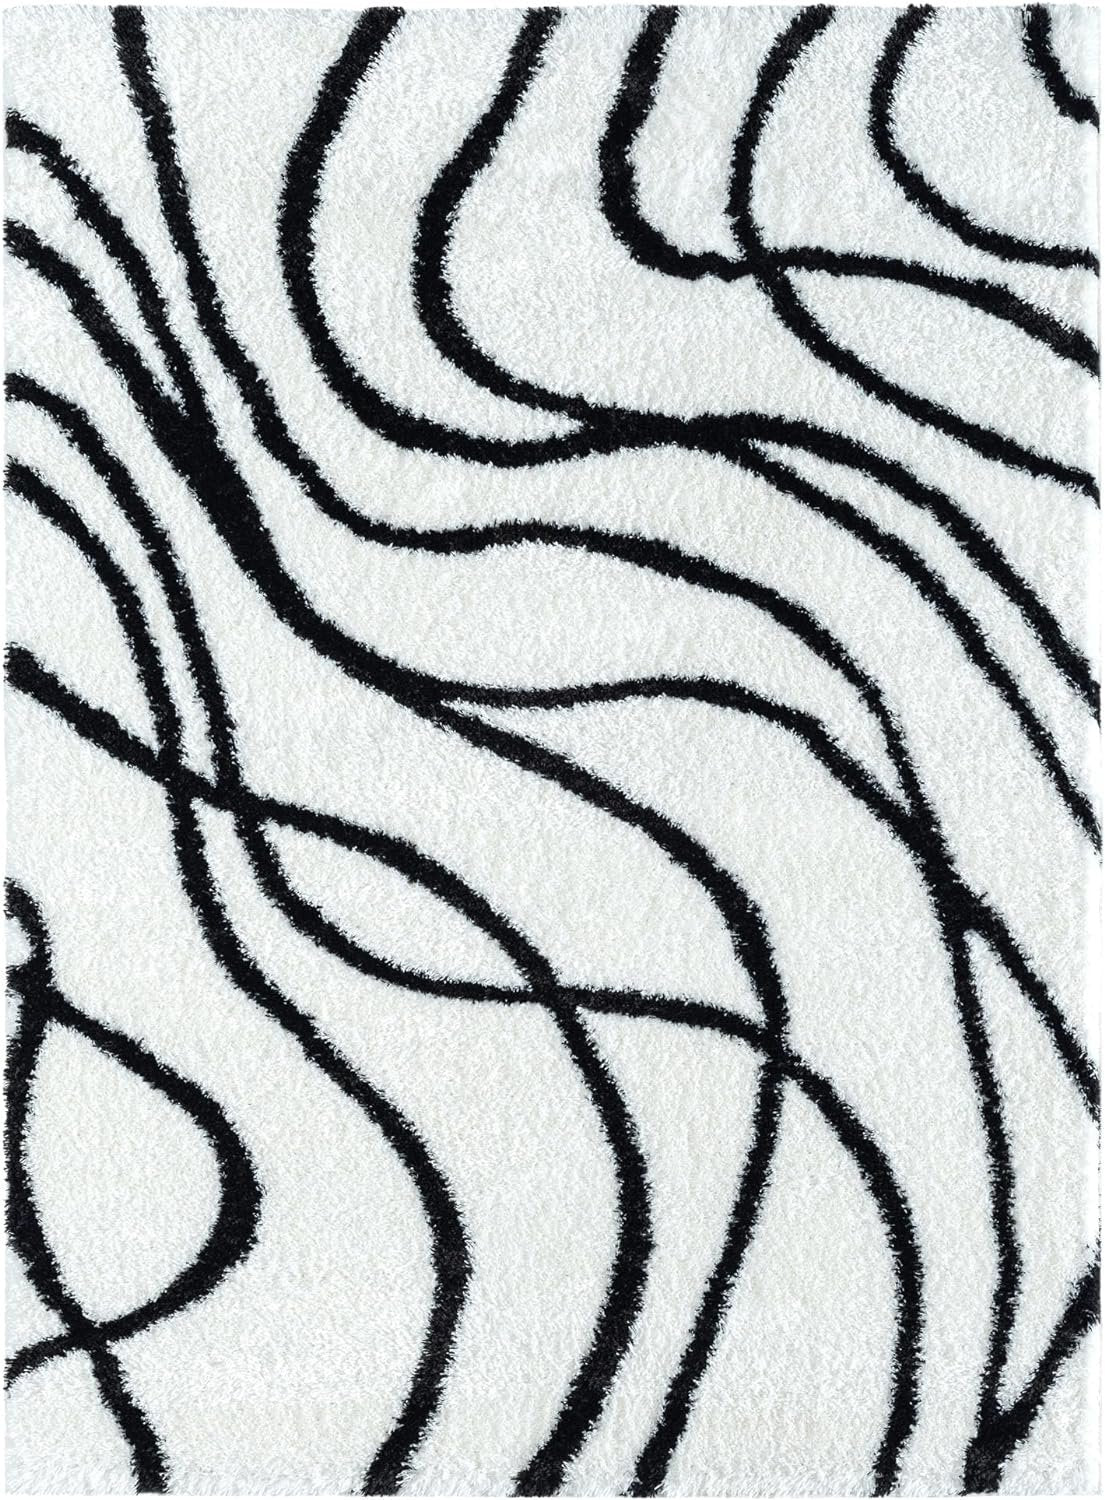 HR Plush Wave-Patterned Shag Rug, 1-Inch Thick Soft High Pile, Stain-Resistant Carpet for Living Room #26223